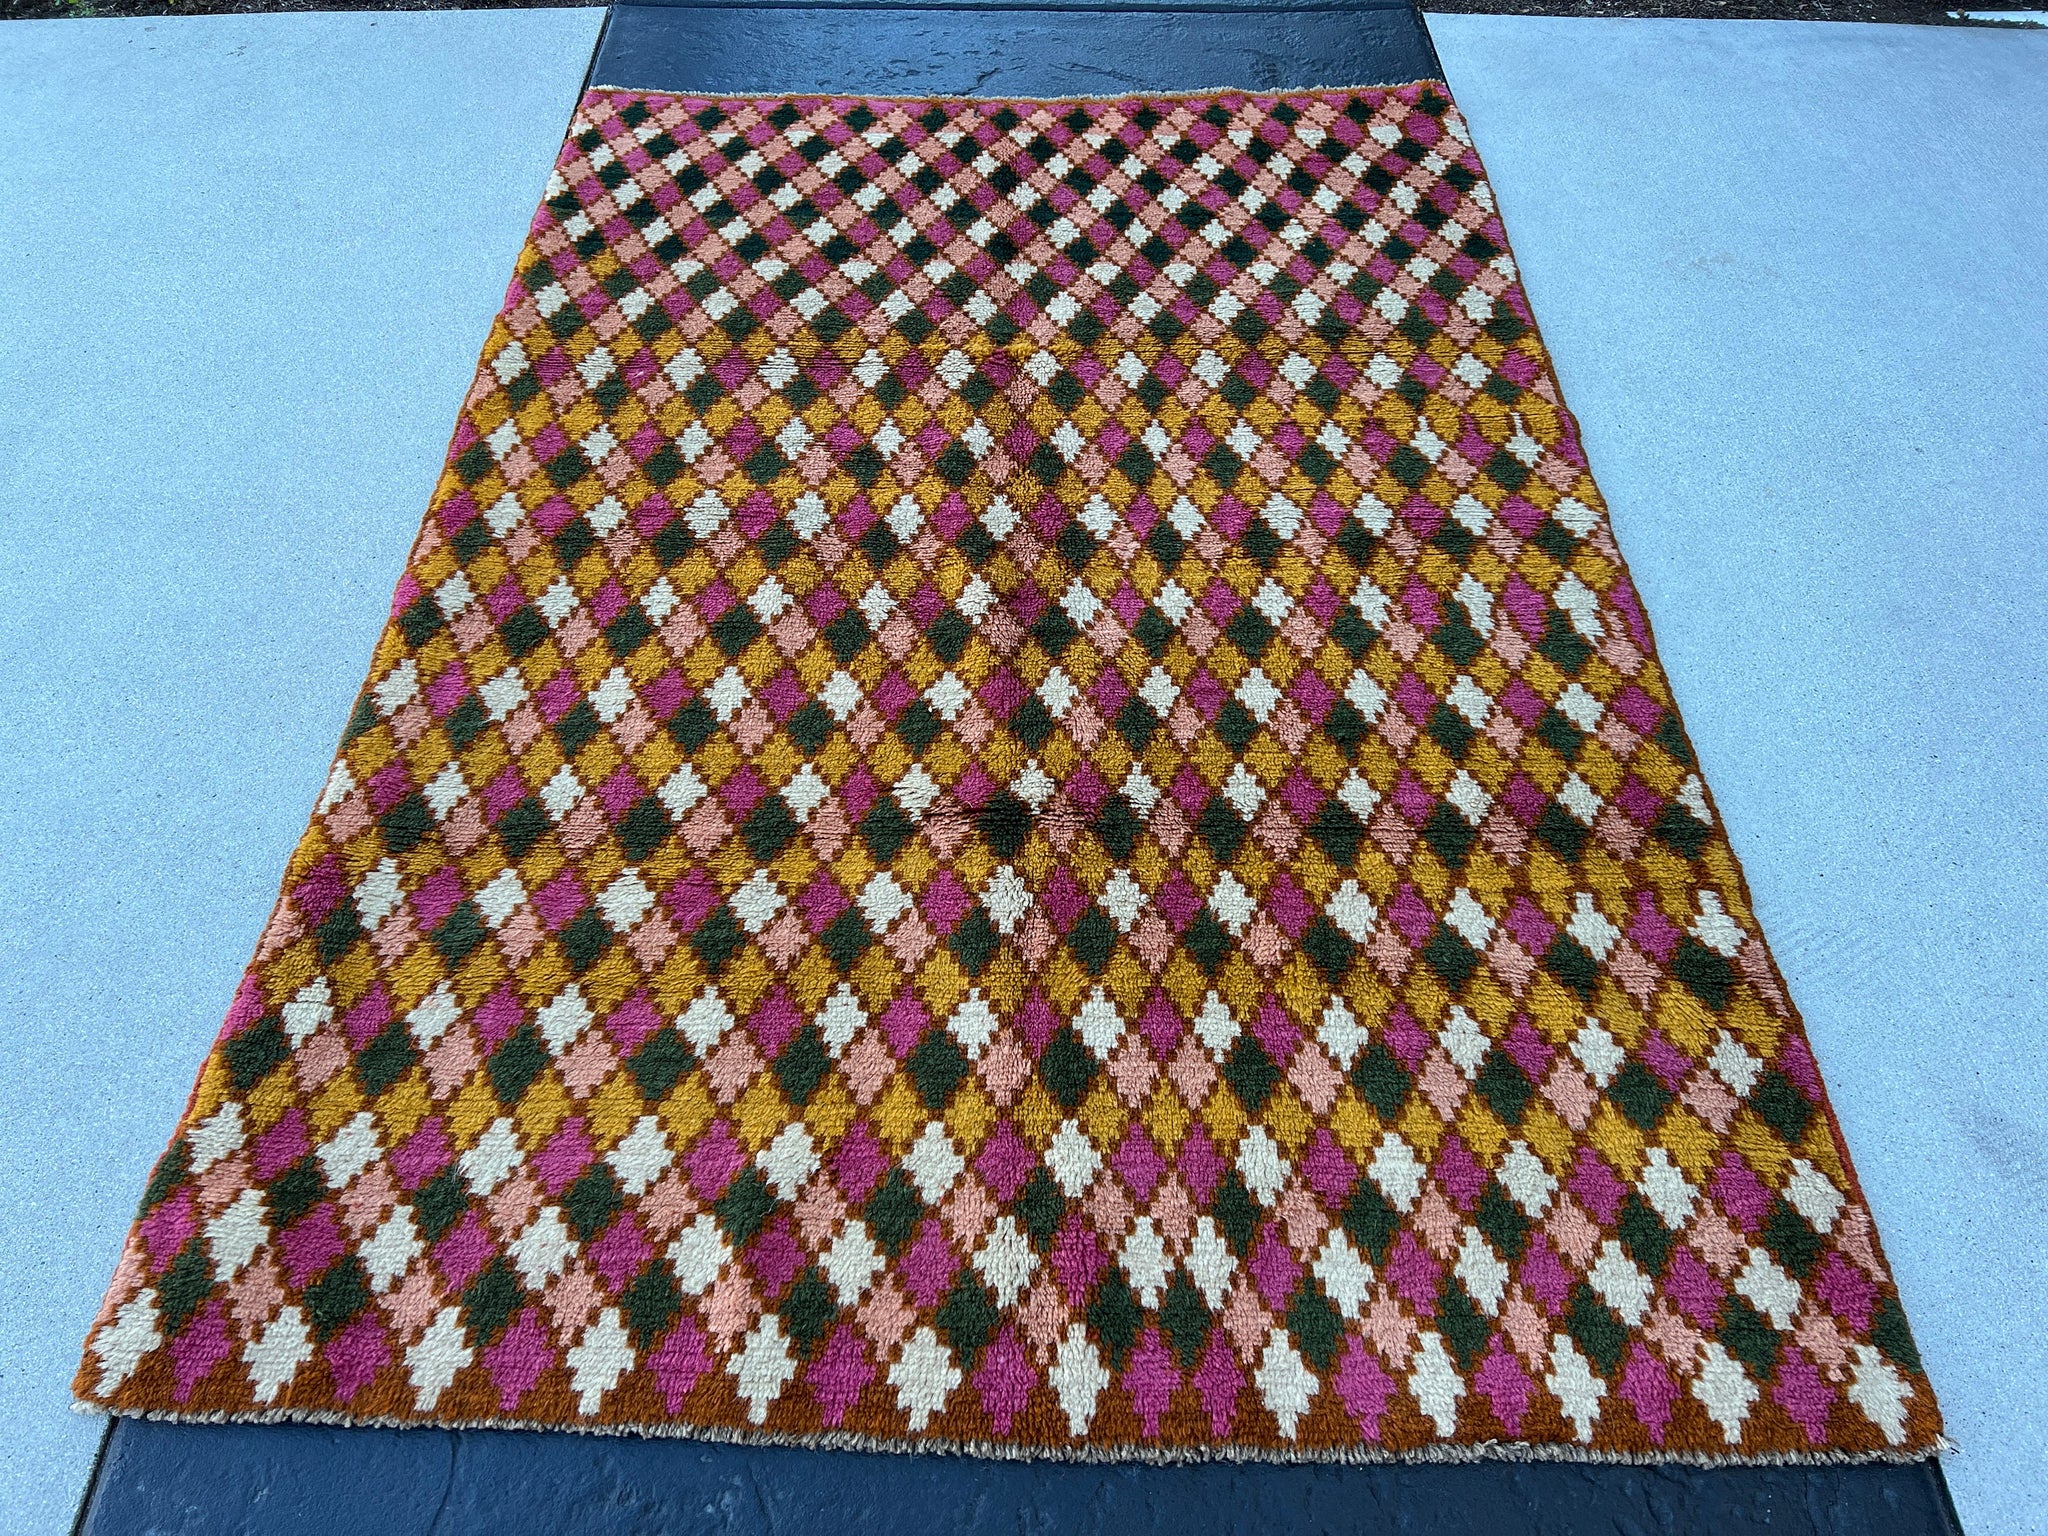 4x6 (120x185) Handmade Vintage Baluch Afghan Rug | Hazel Olive Brown Rose Pink Mustard Yellow Pine Blush Pink Ivory Hand Knotted Geometric